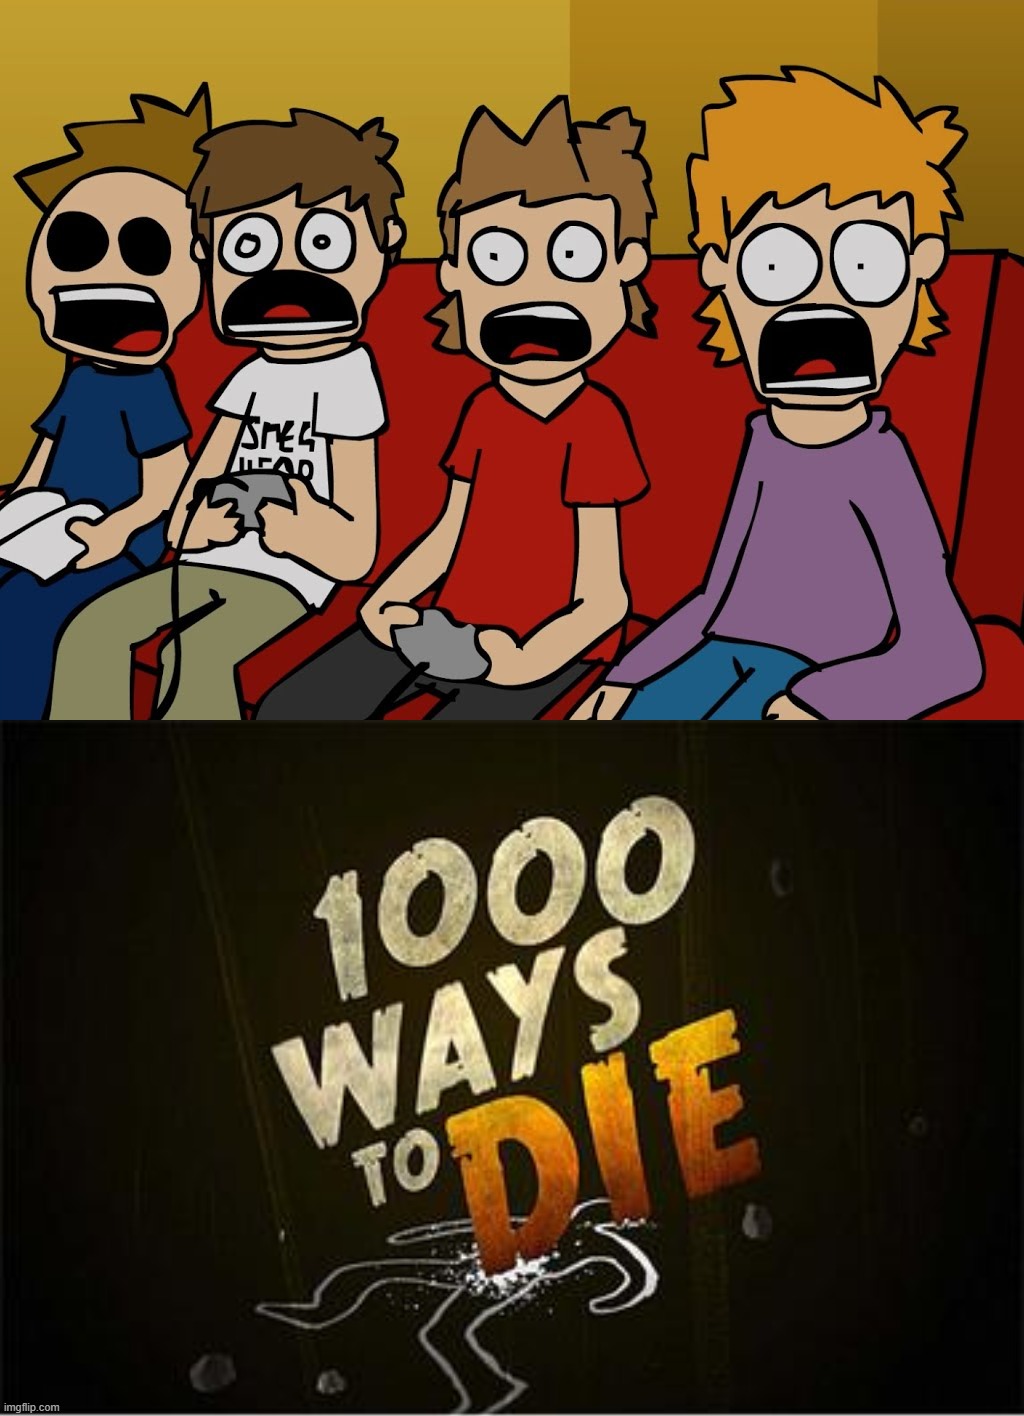 eddsworld reaction 1000 ways to die | image tagged in eddsworld,reaction,memes | made w/ Imgflip meme maker